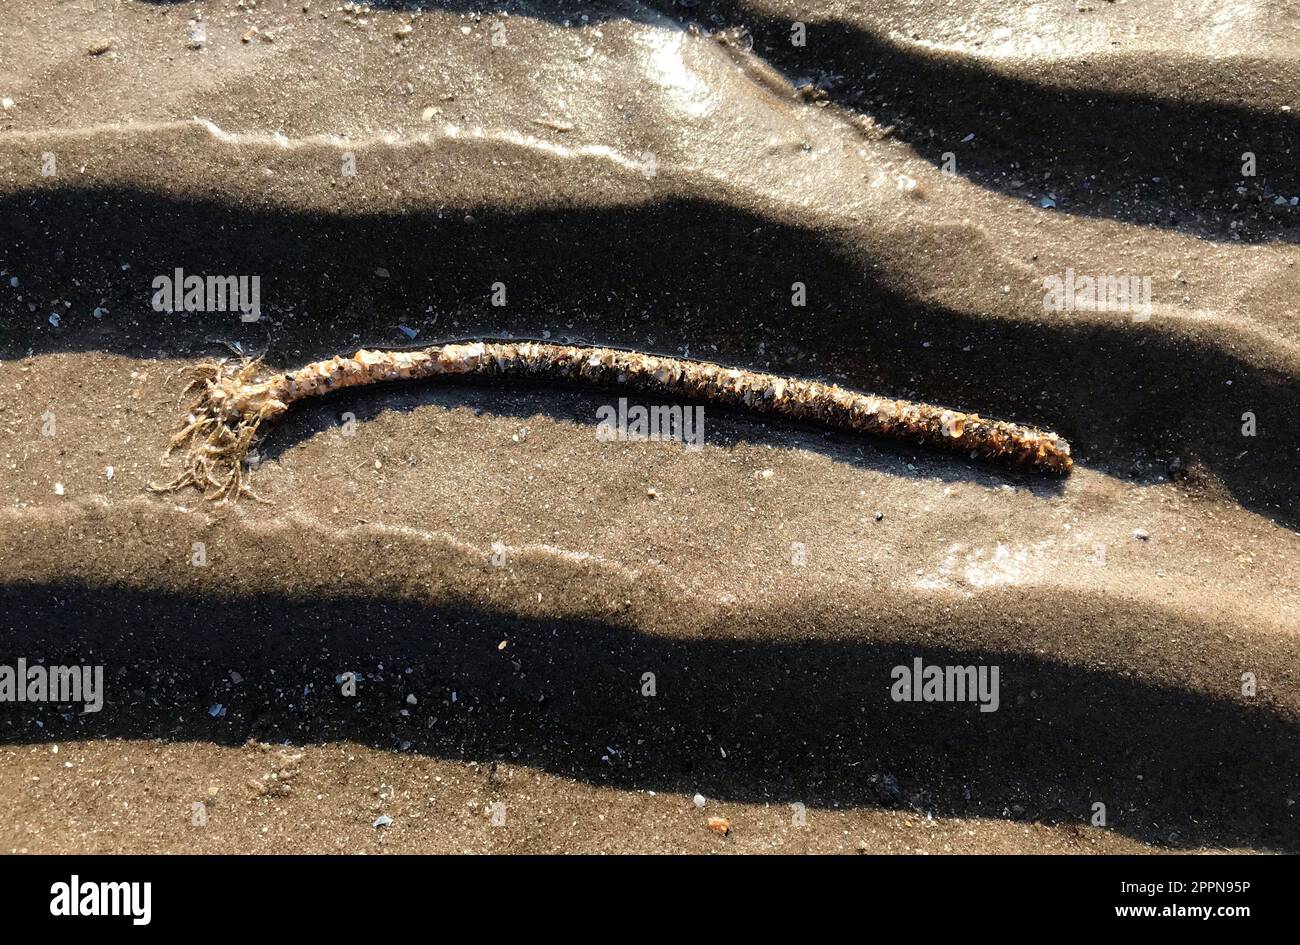 Sand mason worm, Lanice conchilega, species of burrowing marine polychaete Partial tube on beach consisting of cemented sand grains & shell fragments Stock Photo